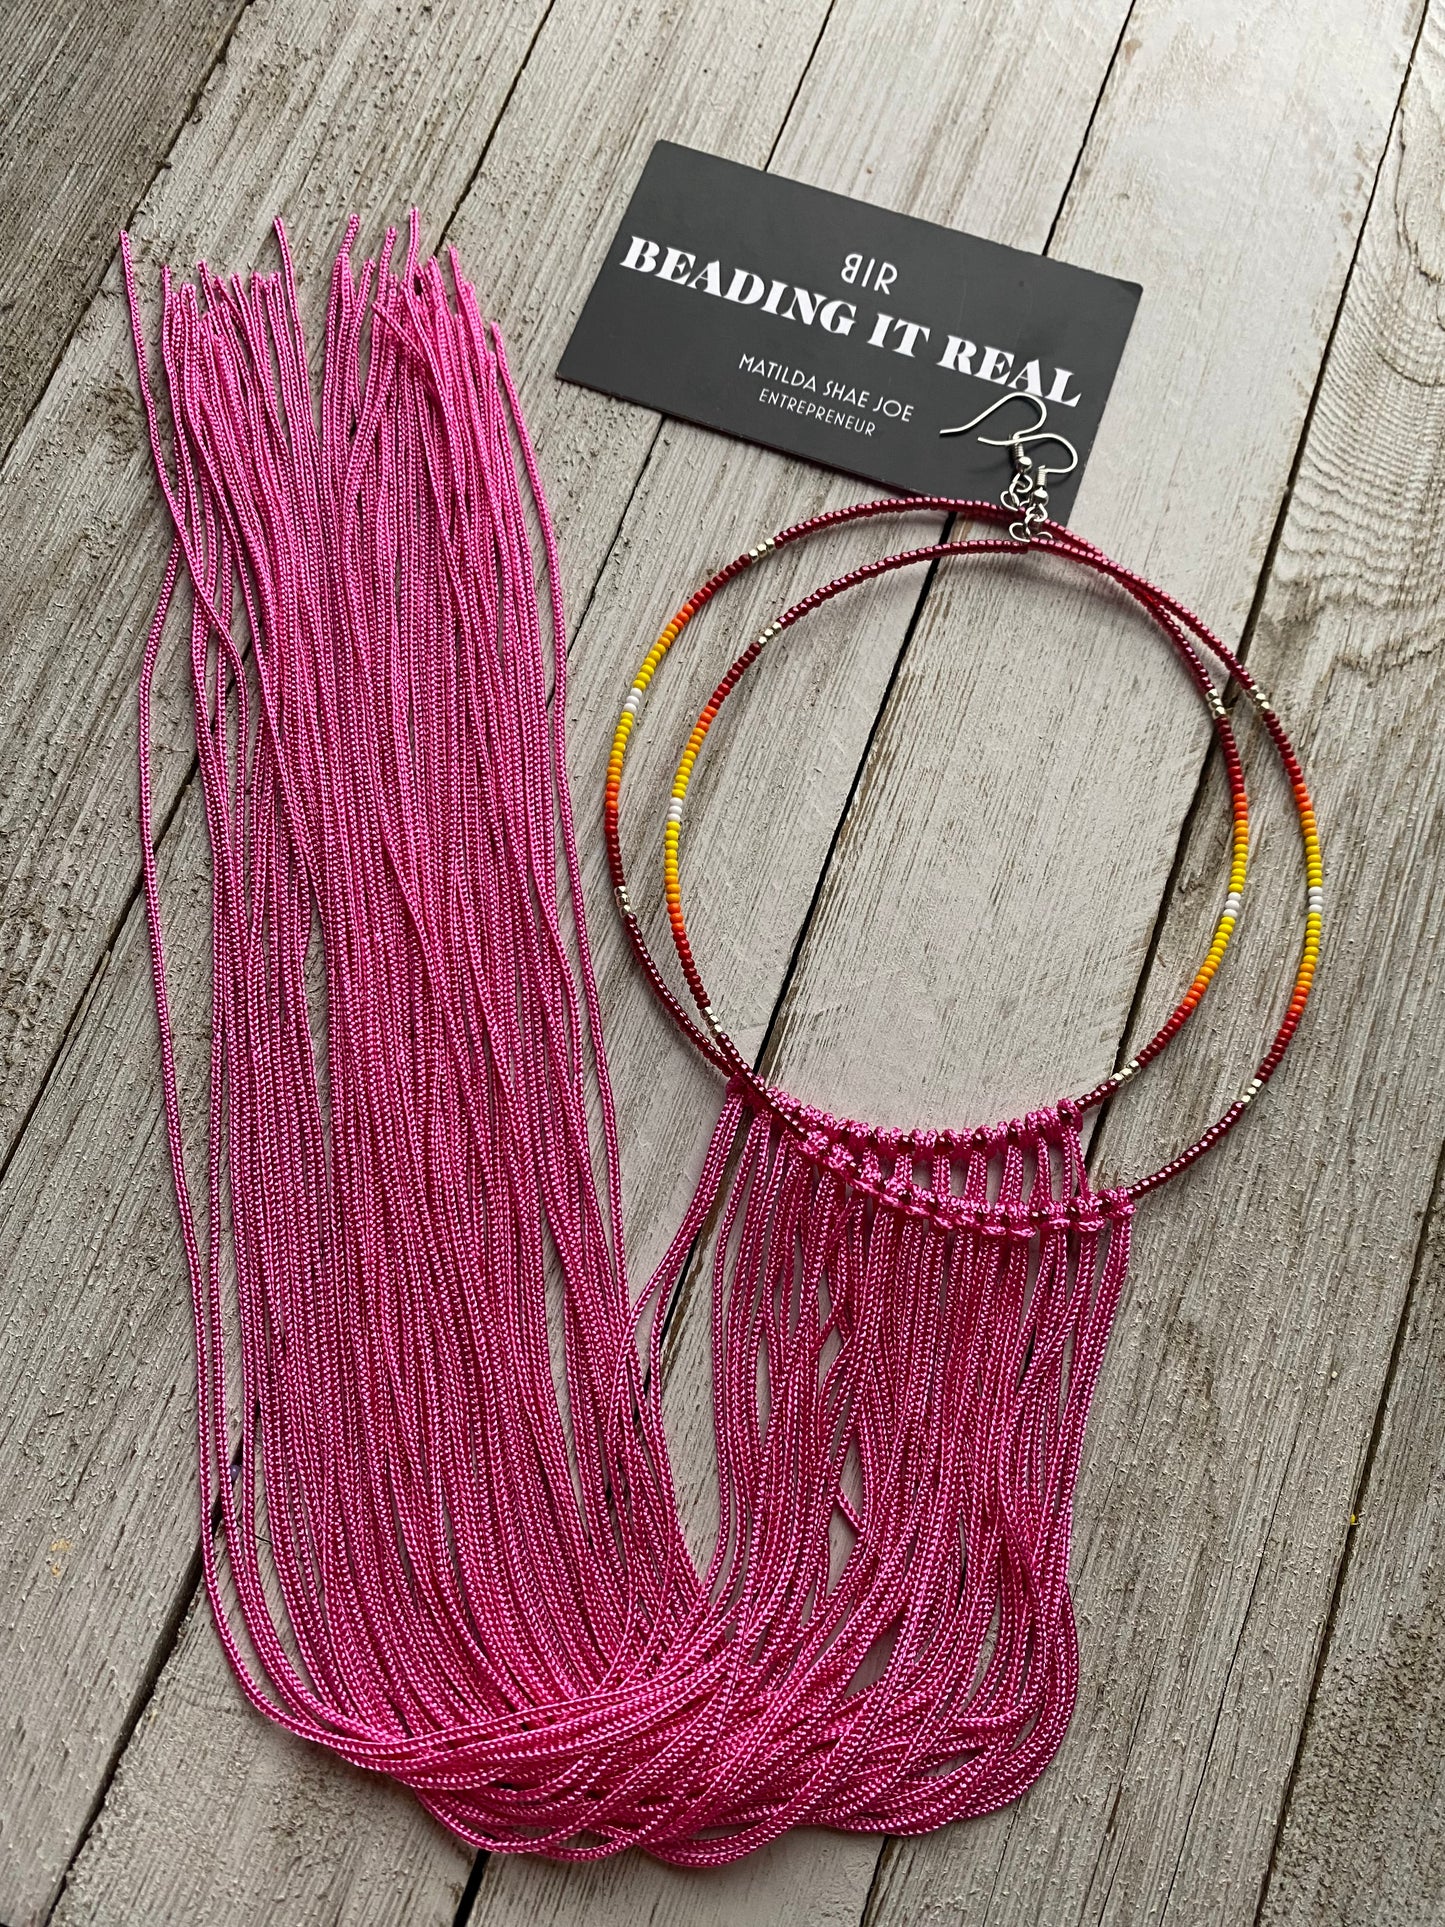 Mega Red Heart Fringes by Beading It Real